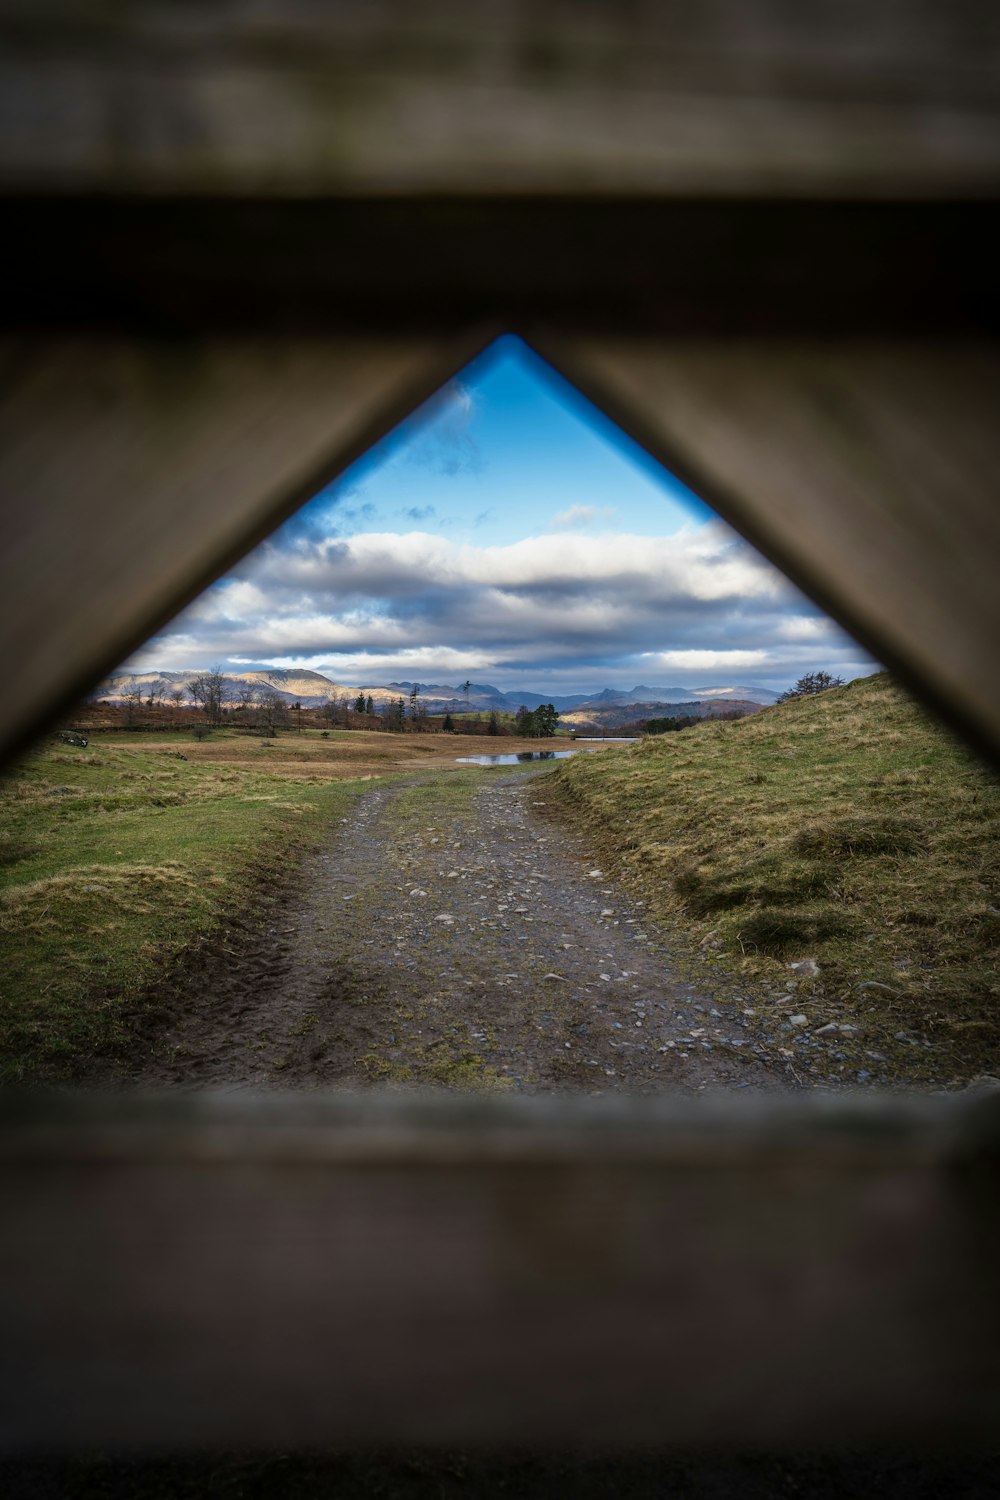 a view of a dirt road through a window